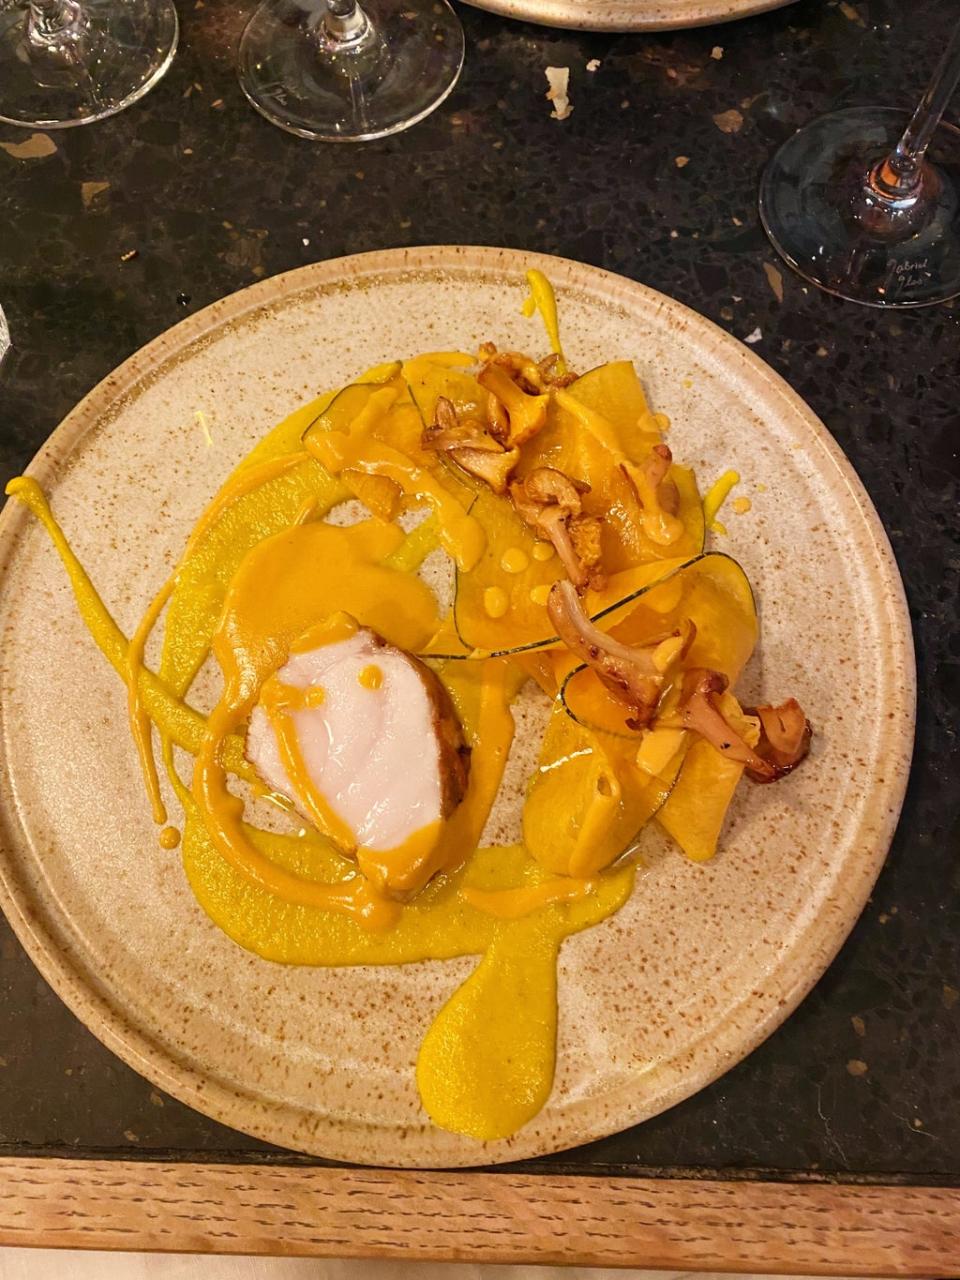 Monkfish was striking orange in colour and the exact personification of the autumn trees outside (Molly Codyre)